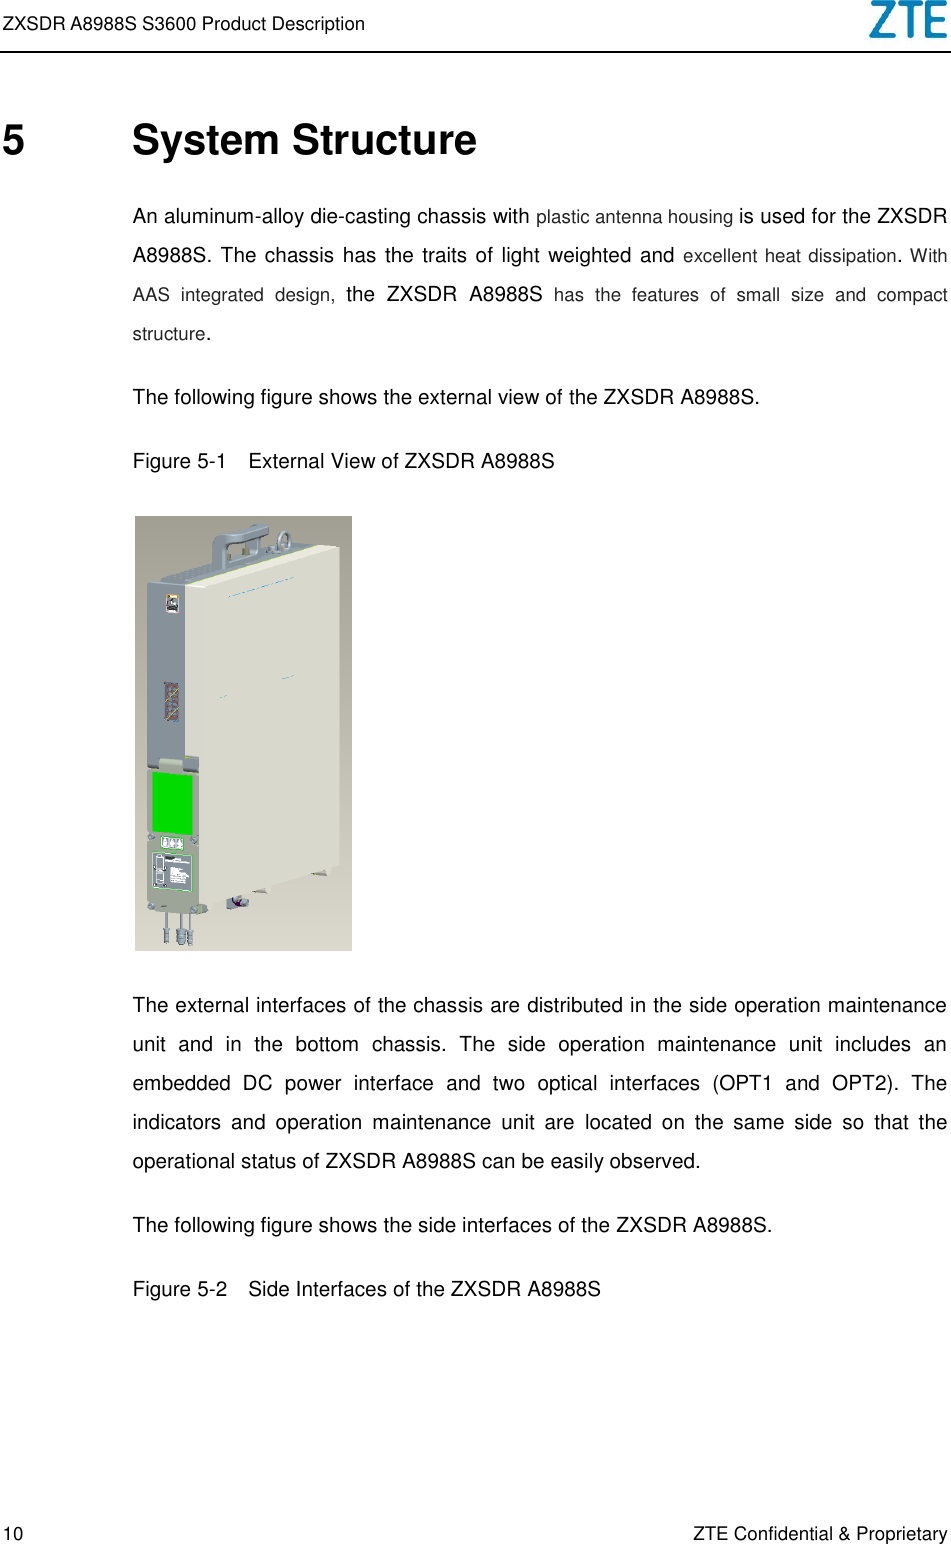 Page 12 of ZTE A8988SS3600 LTE Remote Radio Unit User Manual ZXSDR A8988S S3600 Product Description